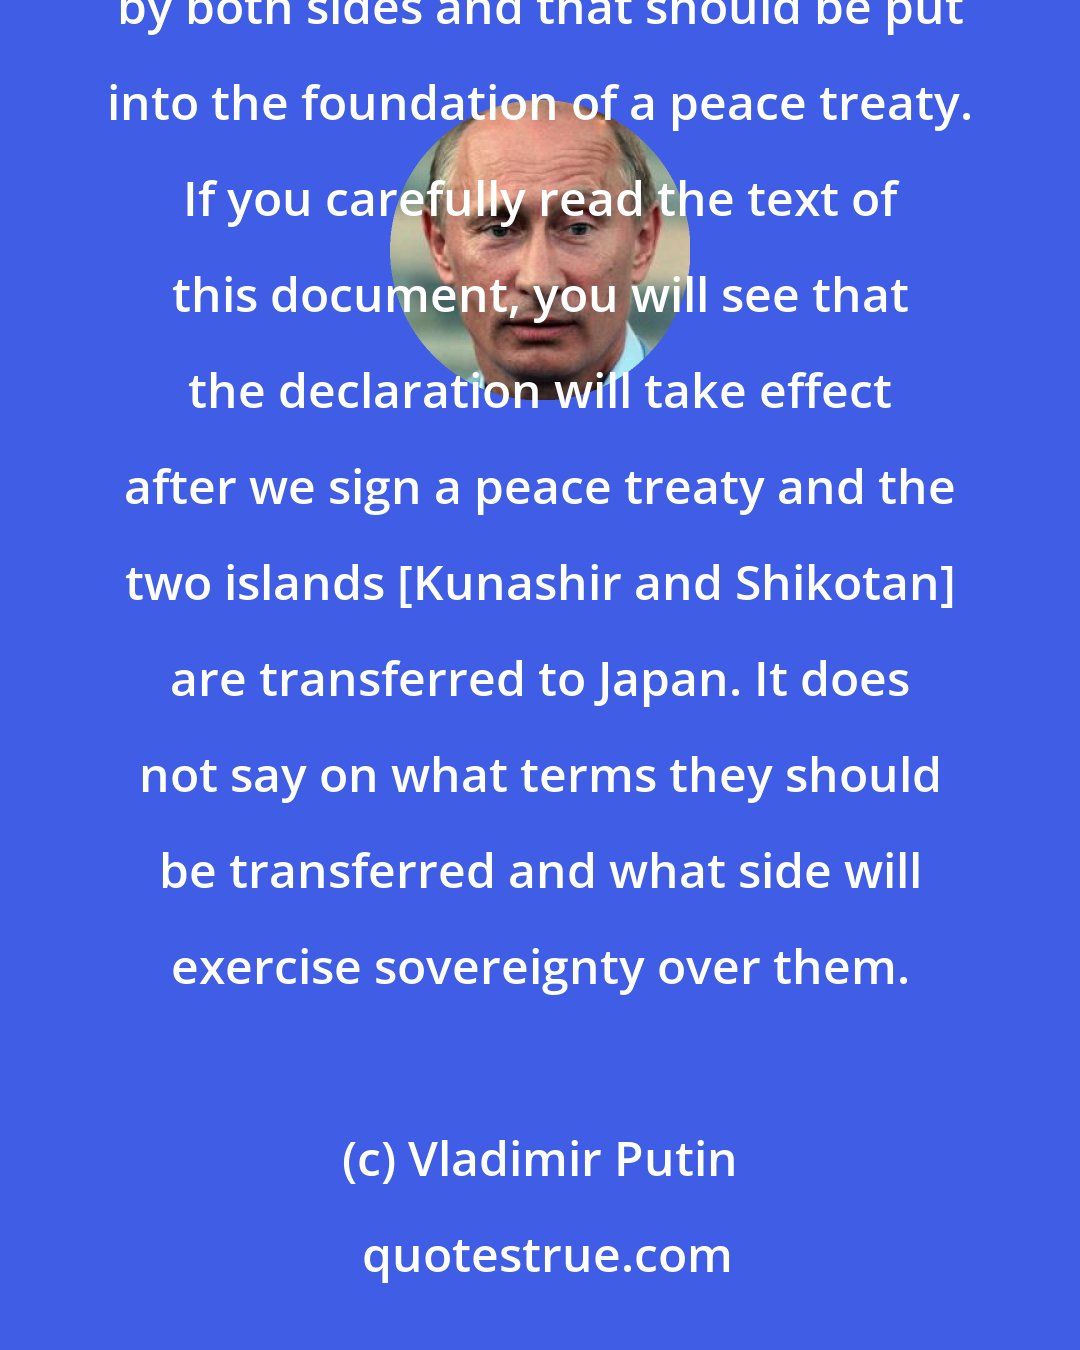 Vladimir Putin: You recalled the 1956 declaration, and this declaration established the rules that should be followed by both sides and that should be put into the foundation of a peace treaty. If you carefully read the text of this document, you will see that the declaration will take effect after we sign a peace treaty and the two islands [Kunashir and Shikotan] are transferred to Japan. It does not say on what terms they should be transferred and what side will exercise sovereignty over them.